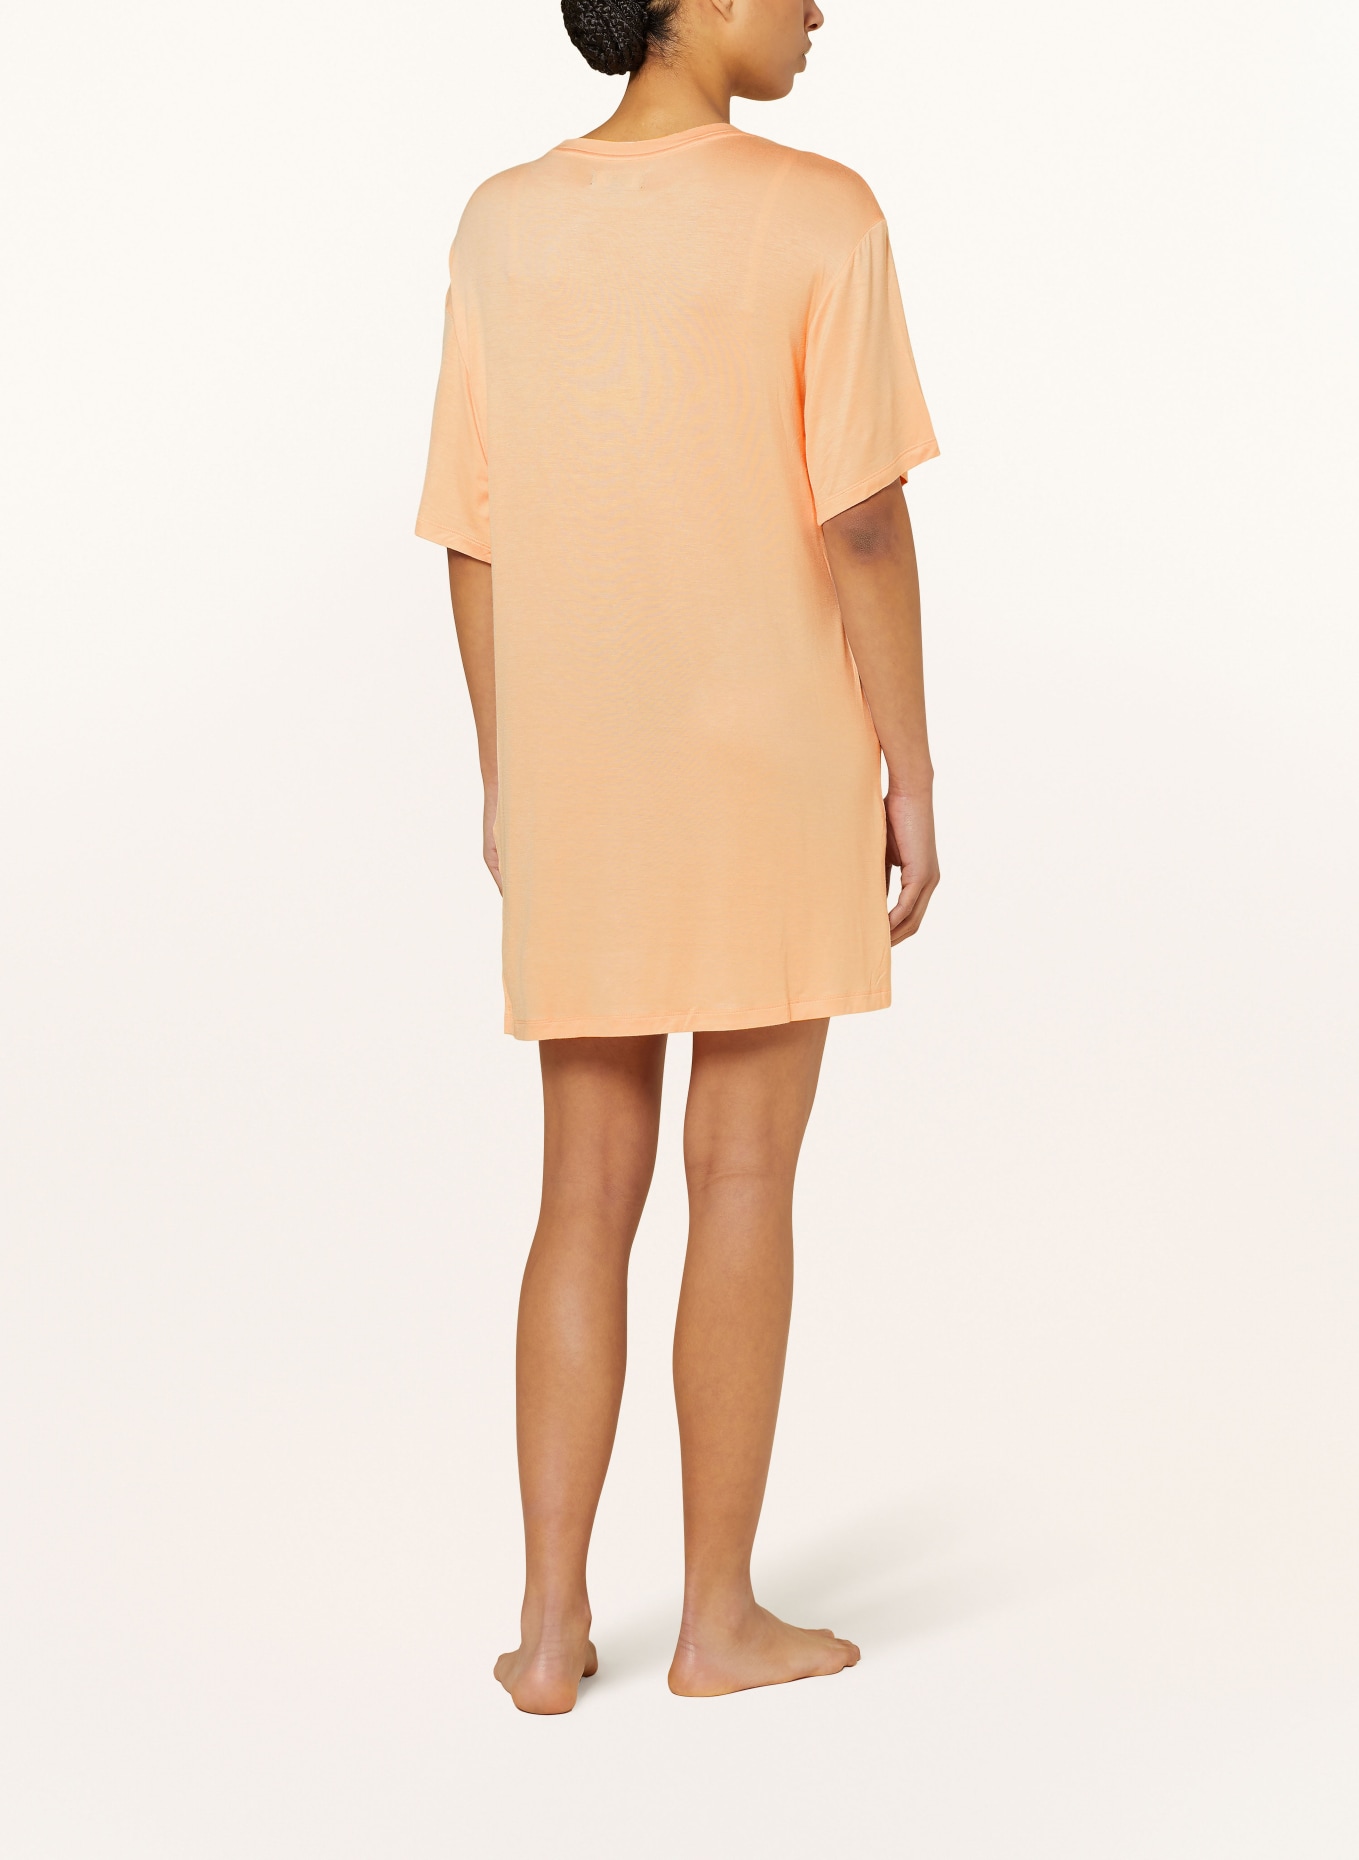 DKNY Nightgown, Color: LIGHT ORANGE (Image 3)